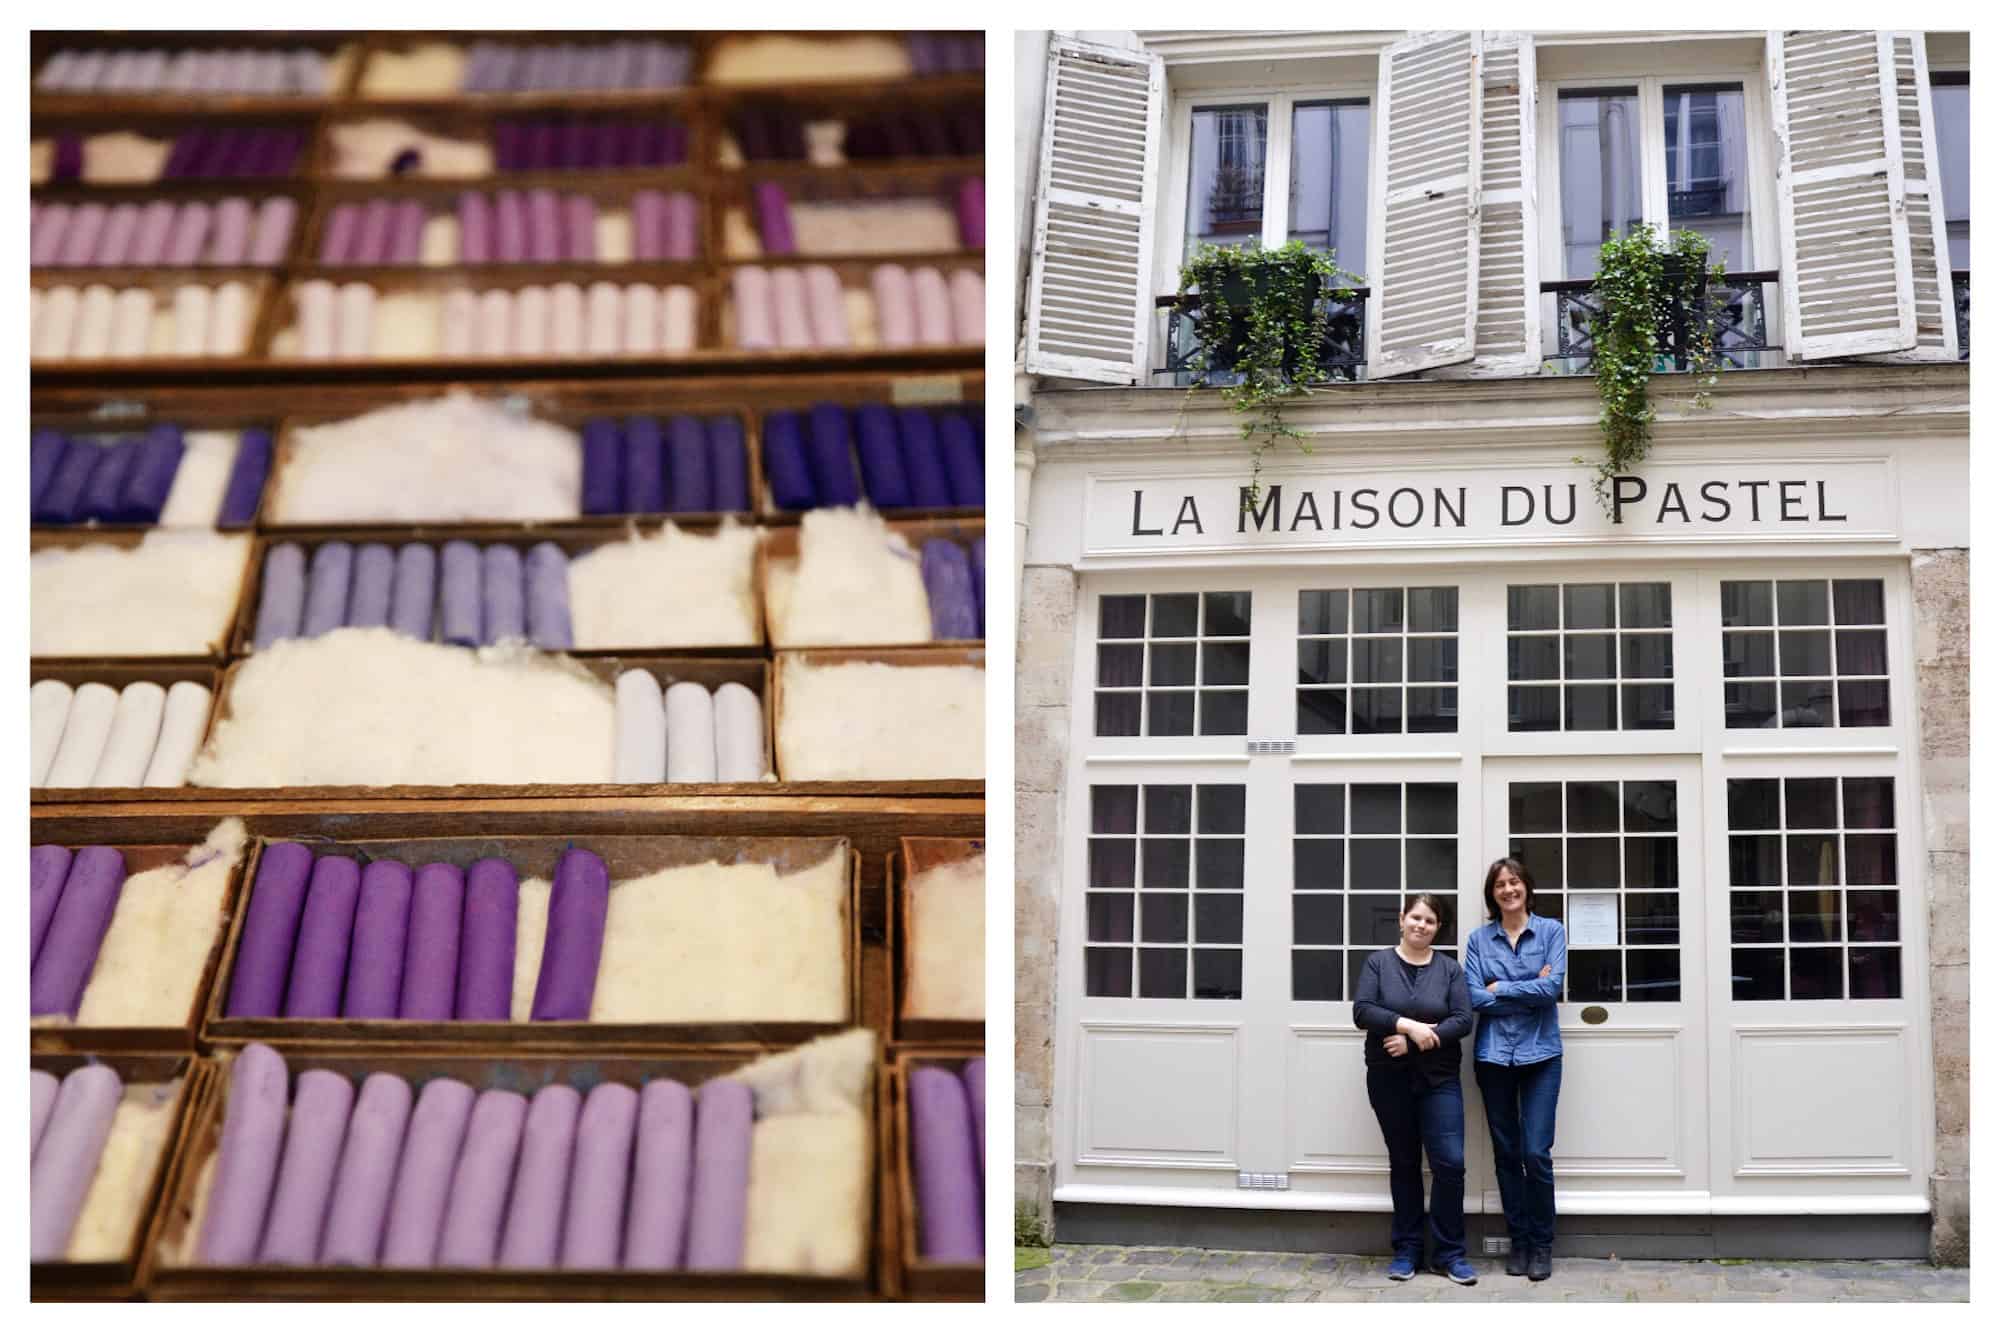 HiP Paris Blog explores the Maison du Pastel store in Paris that sells the most vibrantly colored pastels like these boxes of rich purples (left). Isabelle Roché and Margaret Zayer who run the Maison du Pastel and keep the Parisian landmark alive (right).